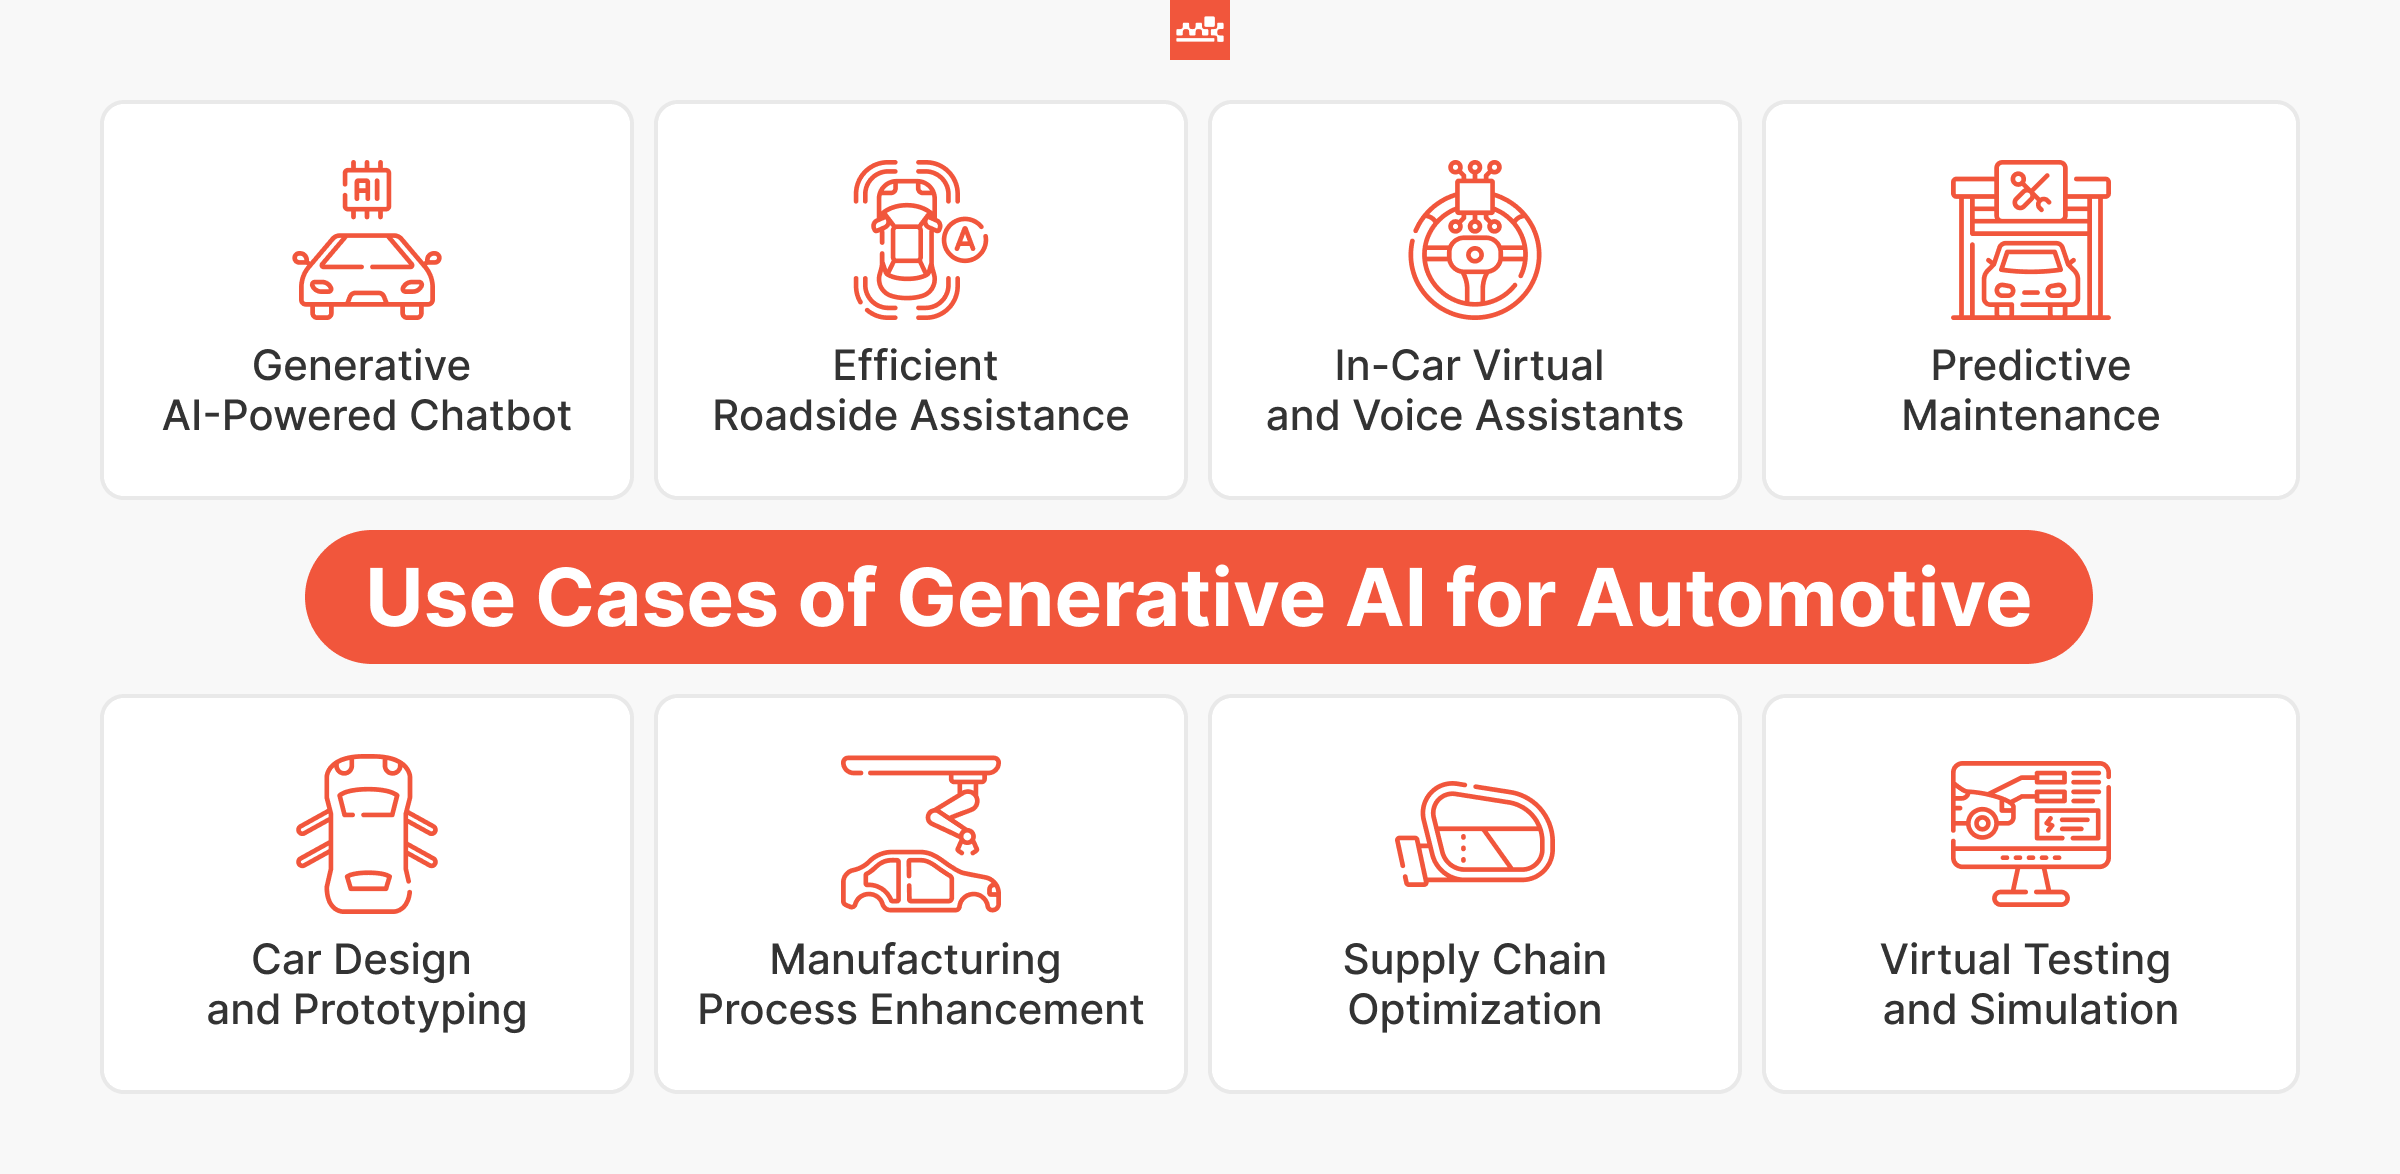 Gen AI Use Cases in the Automotive Industry